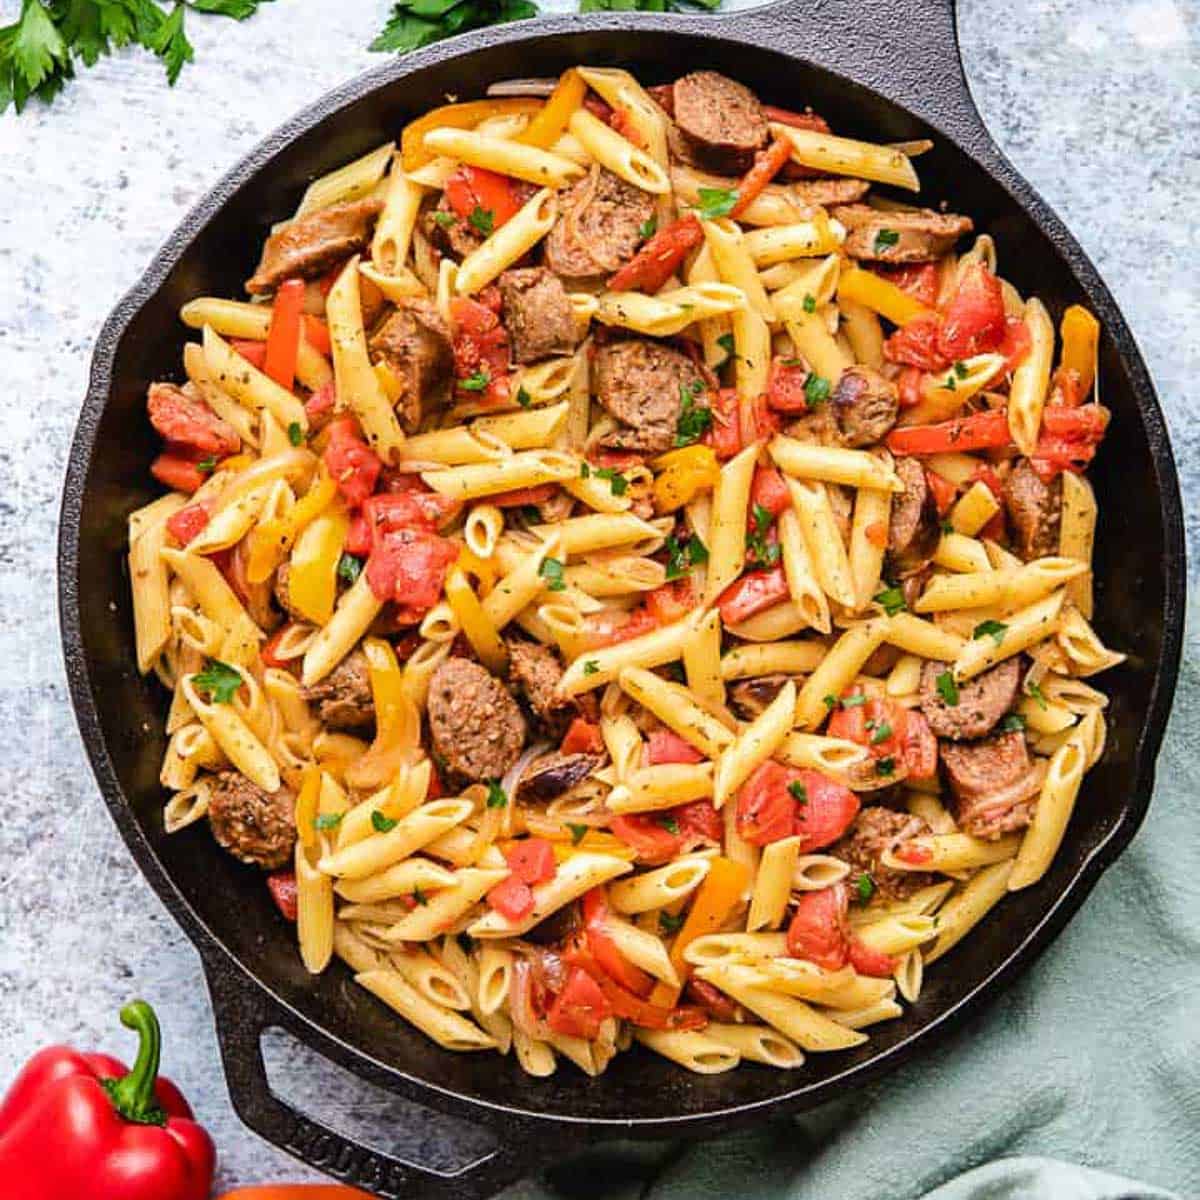 Sausage and peppers pasta